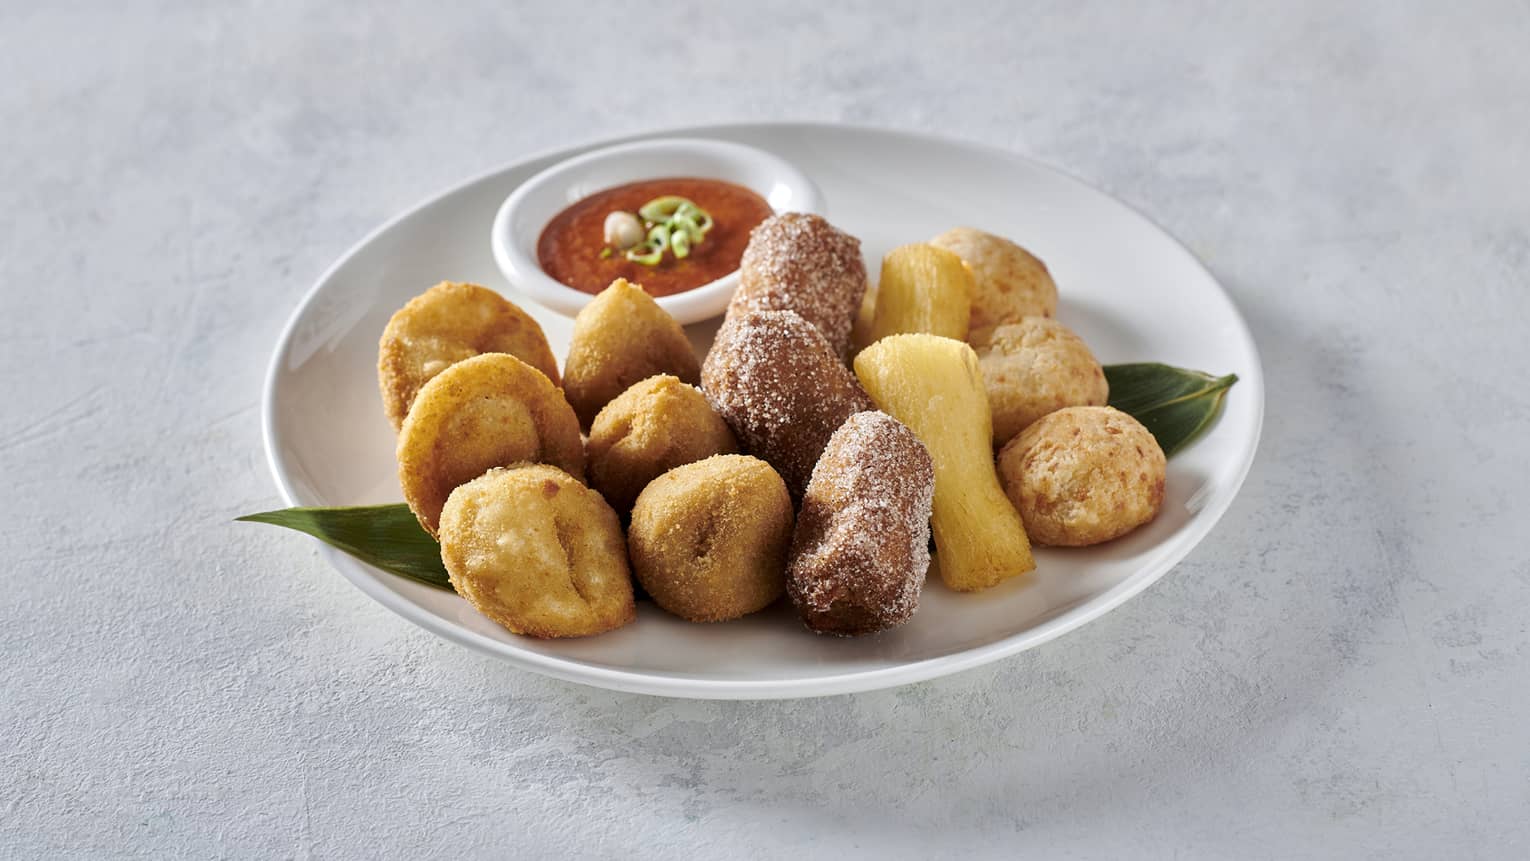 Selection of Brazilian Fried Pastries